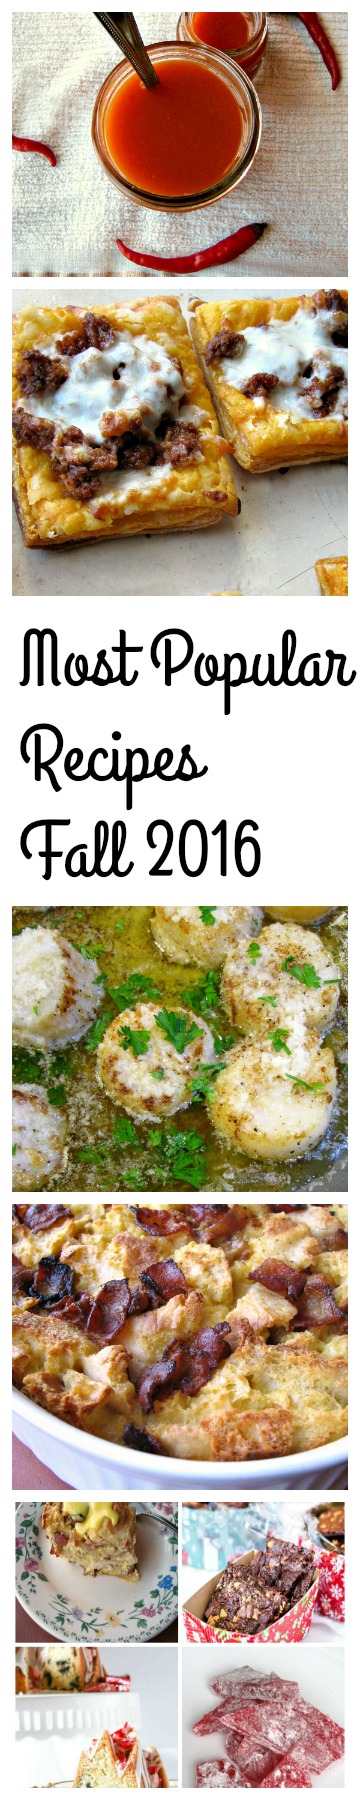 Most Popular Recipes Fall 2016- Homemade Cayenne Pepper Sauce, Cheesy Chorizo Puff Pastry Tarts, Browned Butter Garlic Parmesan Scallops, Overnight Eggs Benedict Casserole, 14 of the Best Christmas Recipes.